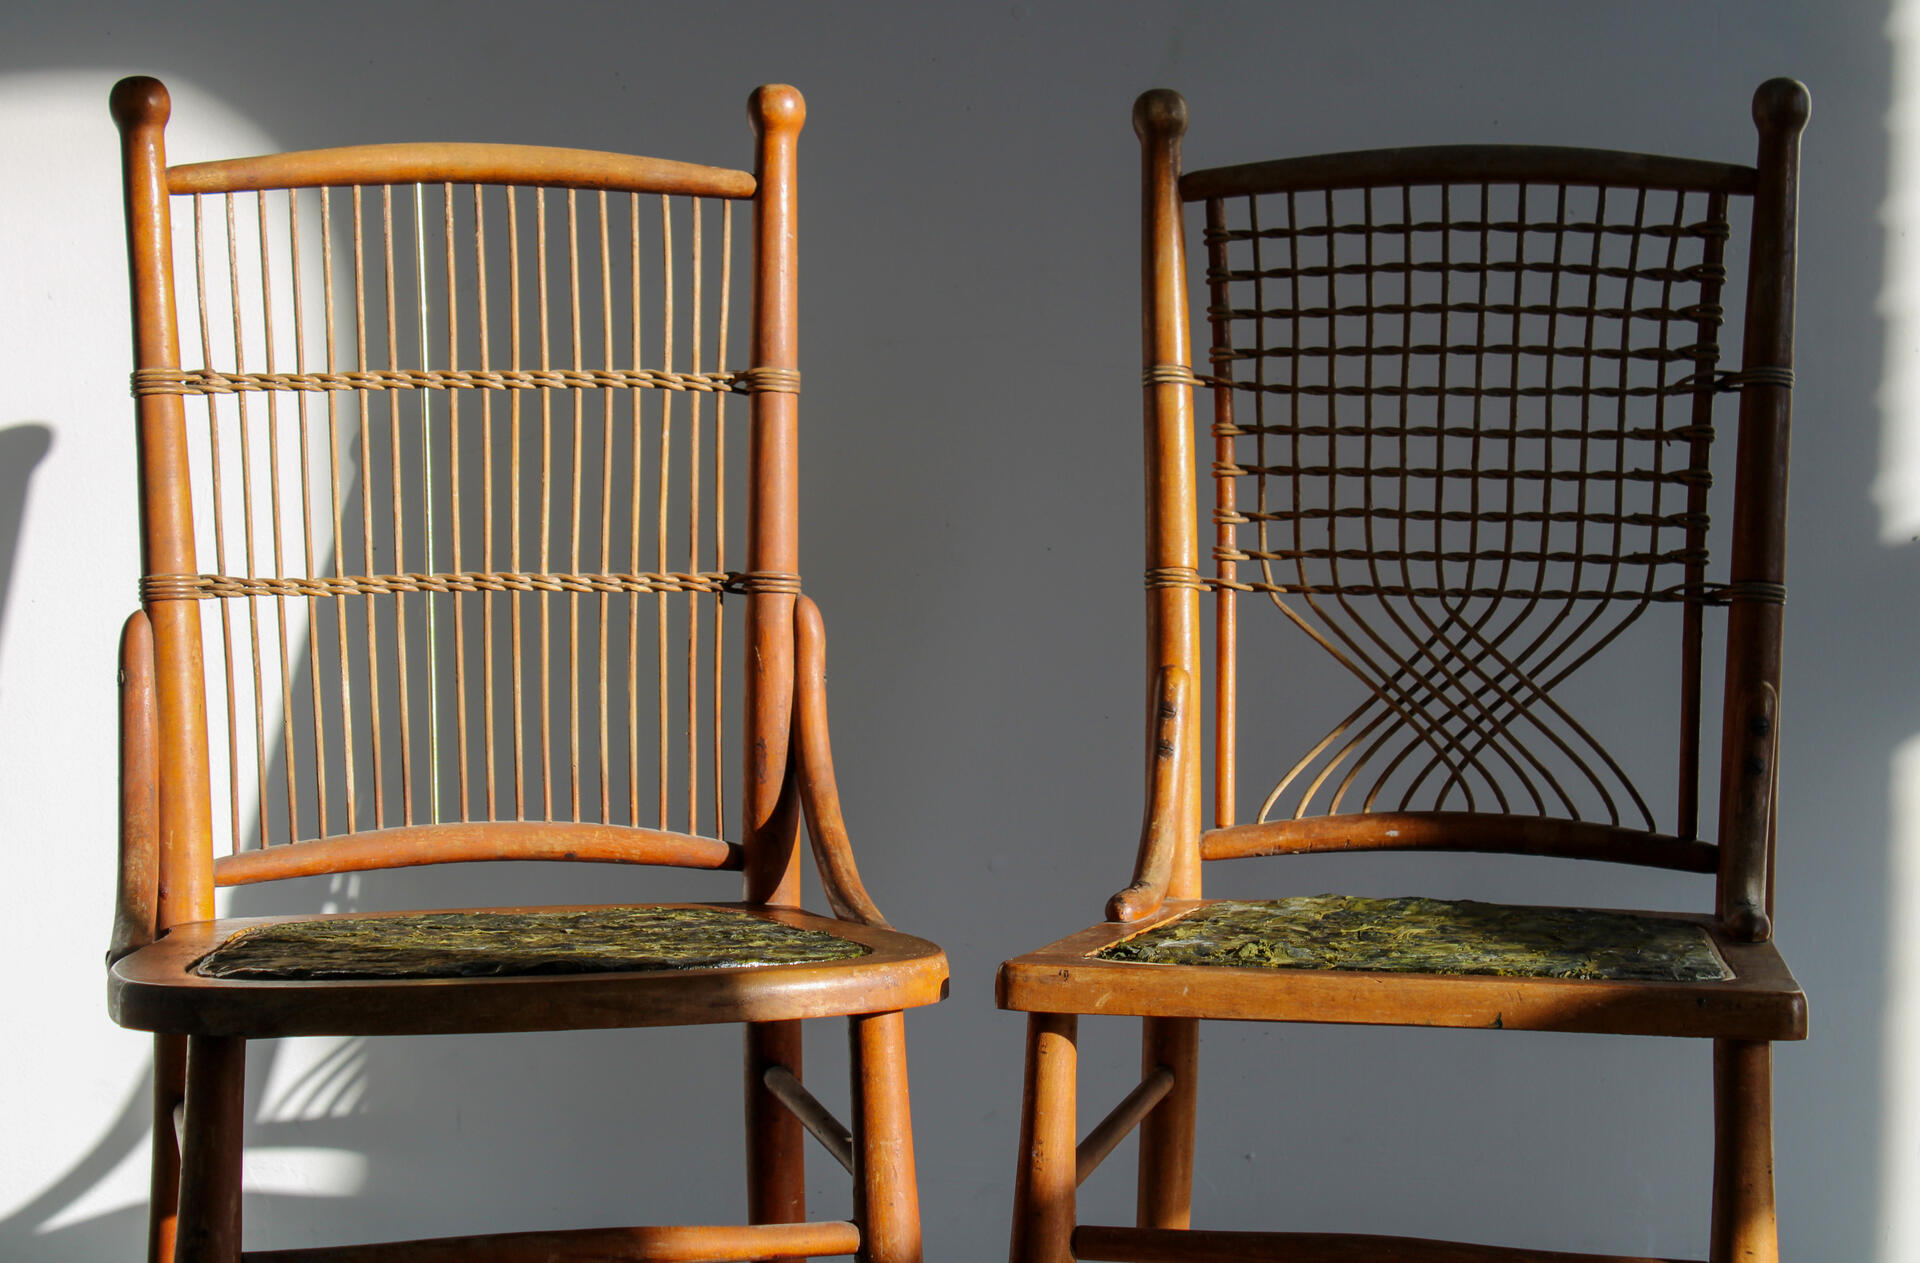 Two chairs (dark brown, ratan-style) sit side by side. Both have repaired seats made from woven pieces of kelp. The kelp reads various hues of green, from dark to light. Somewhat like a camoflauge pattern.